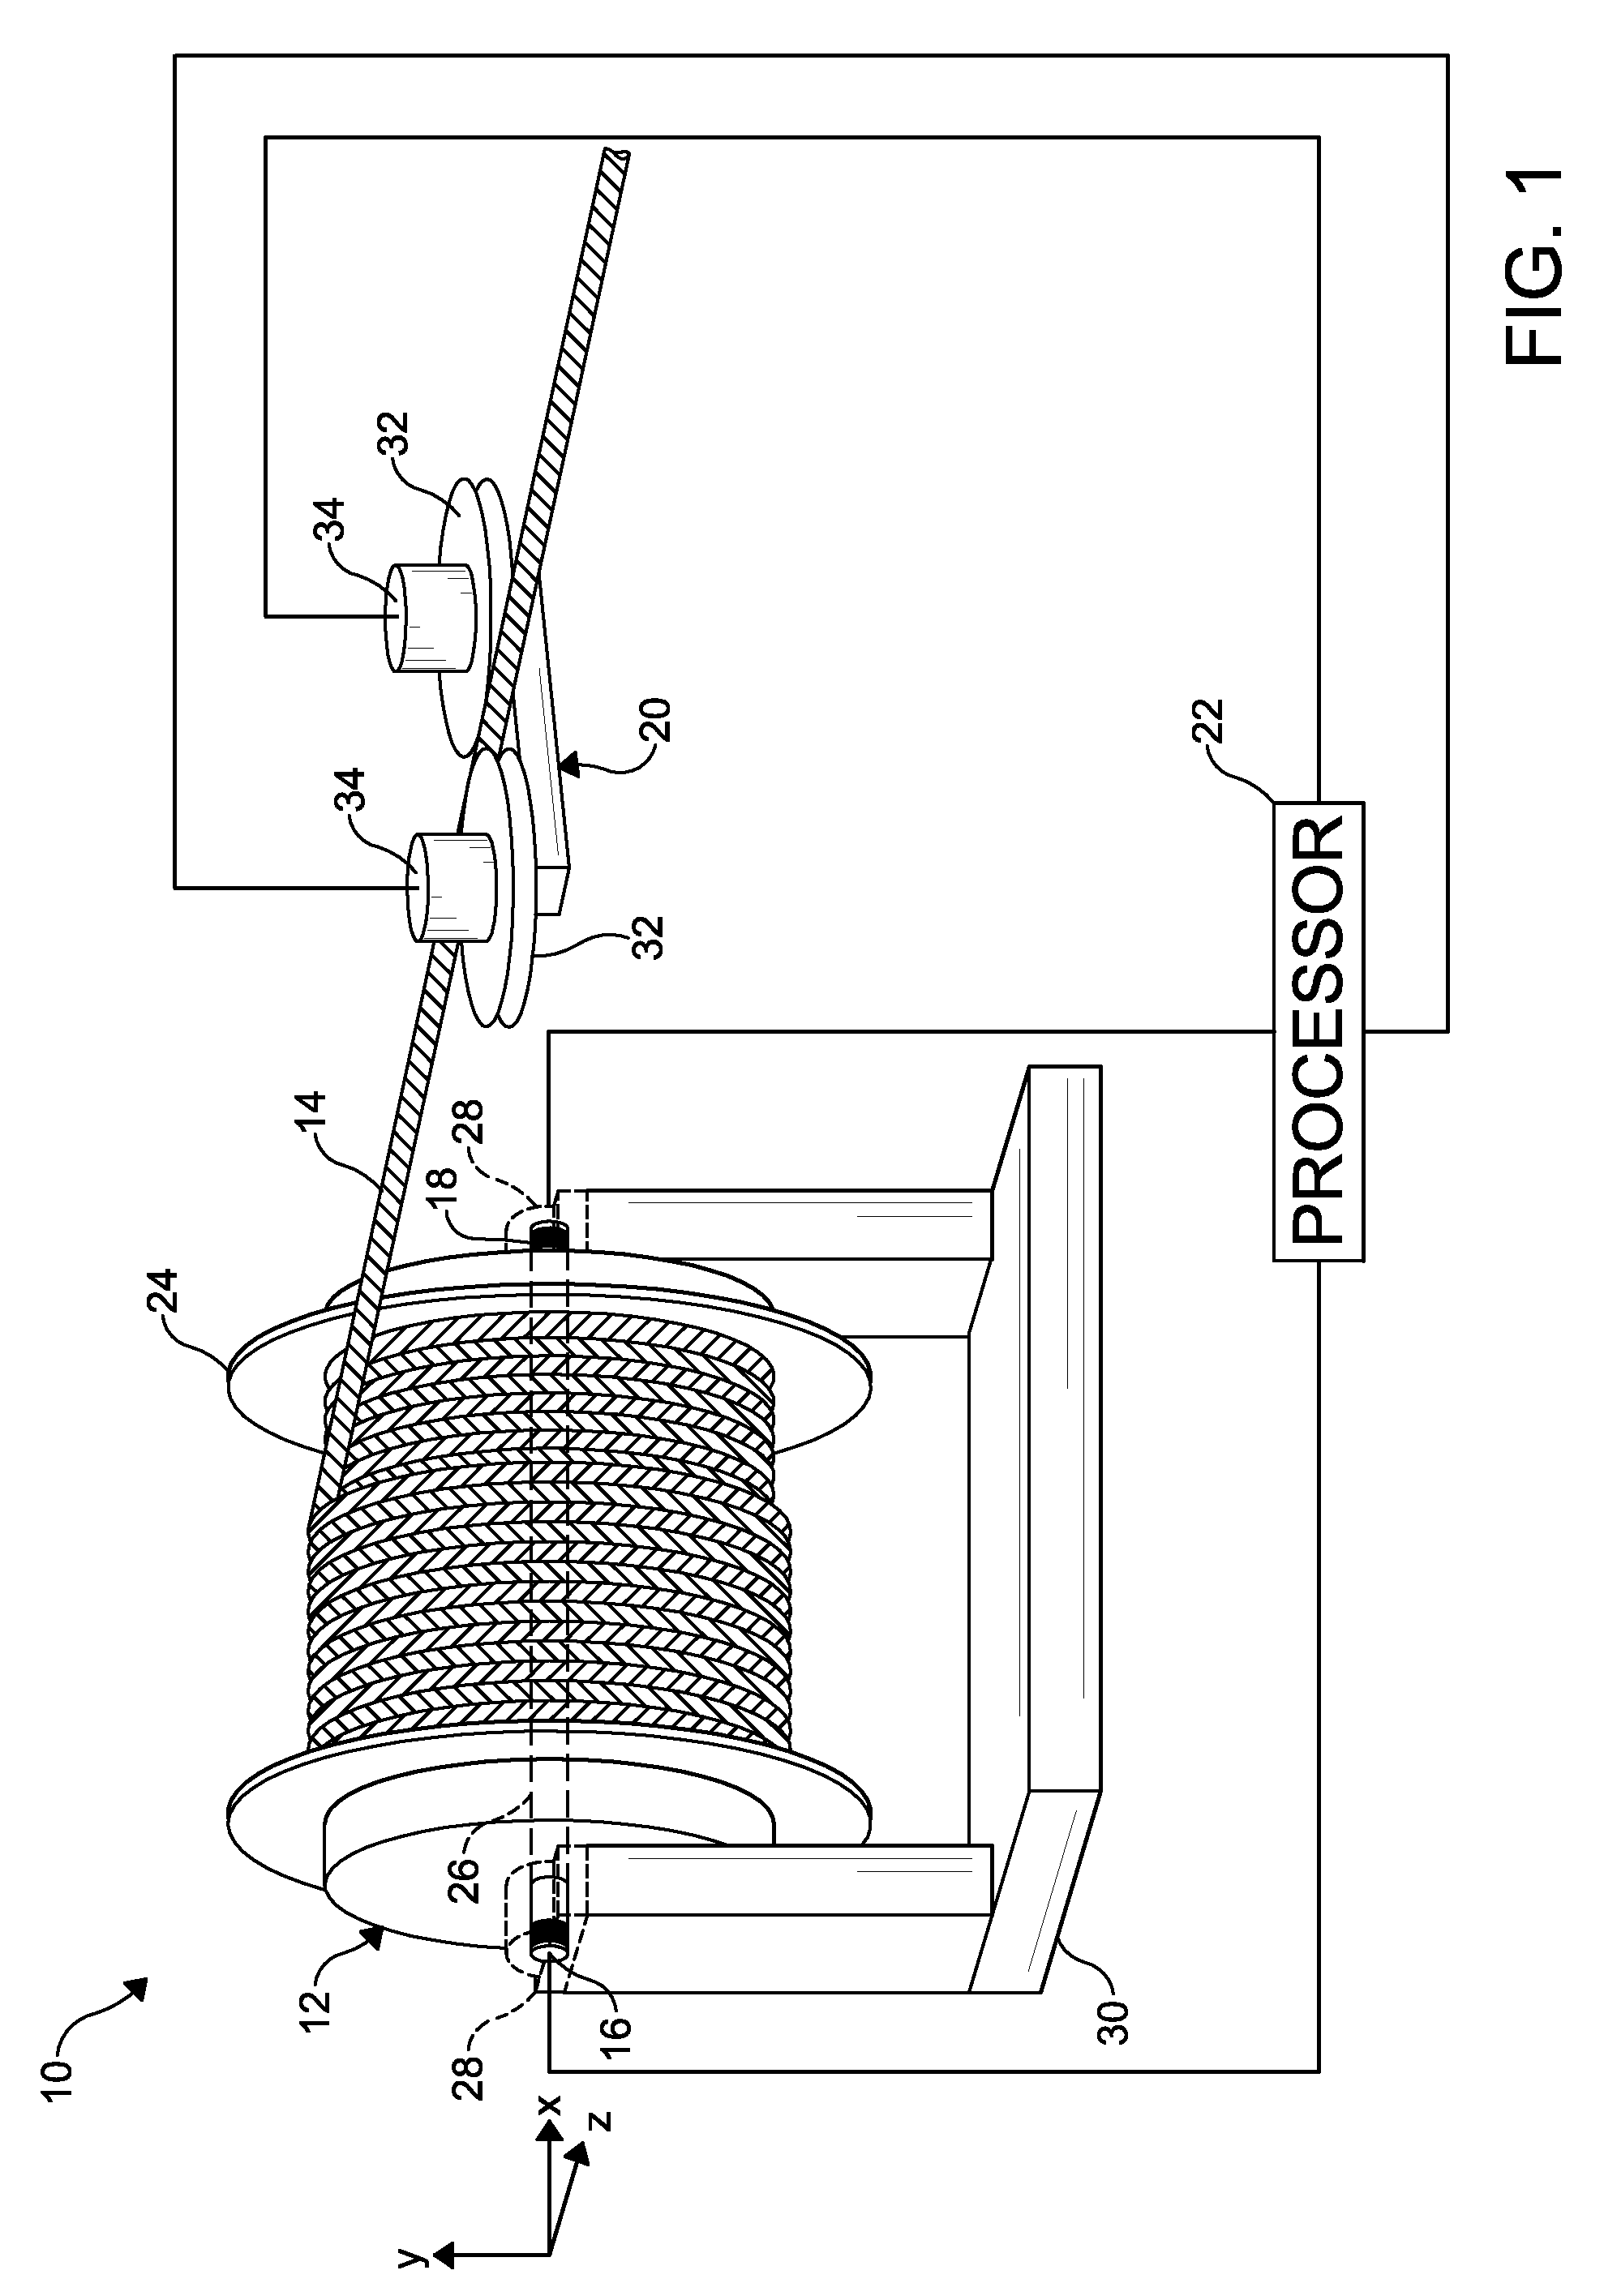 Assembly, system, and method for cable tension measurement